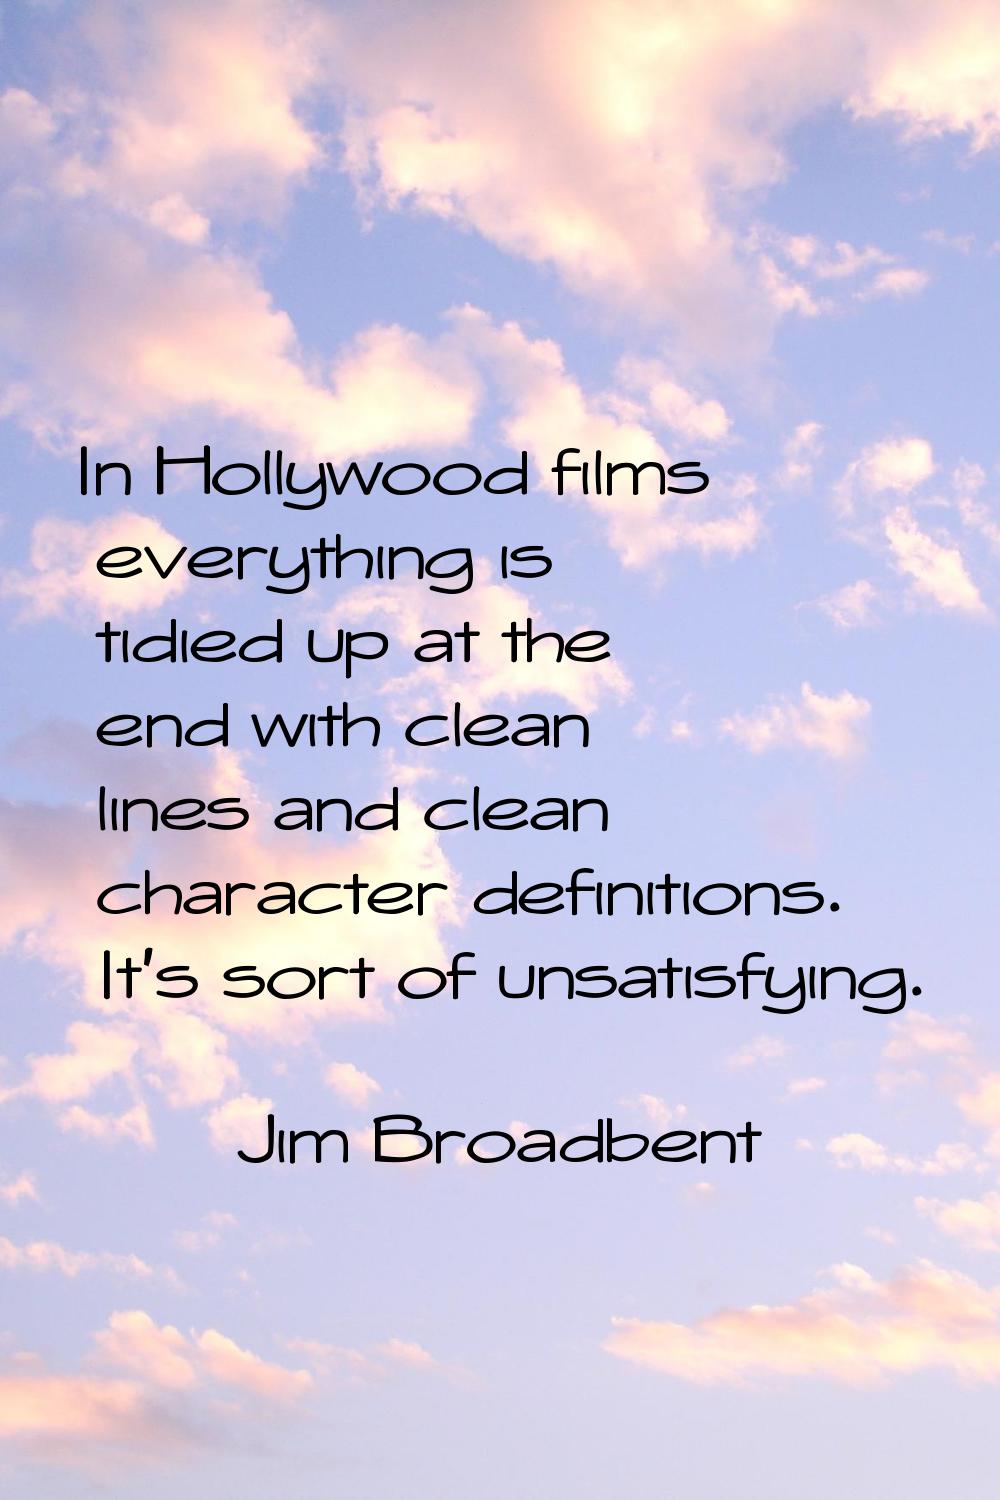 In Hollywood films everything is tidied up at the end with clean lines and clean character definiti